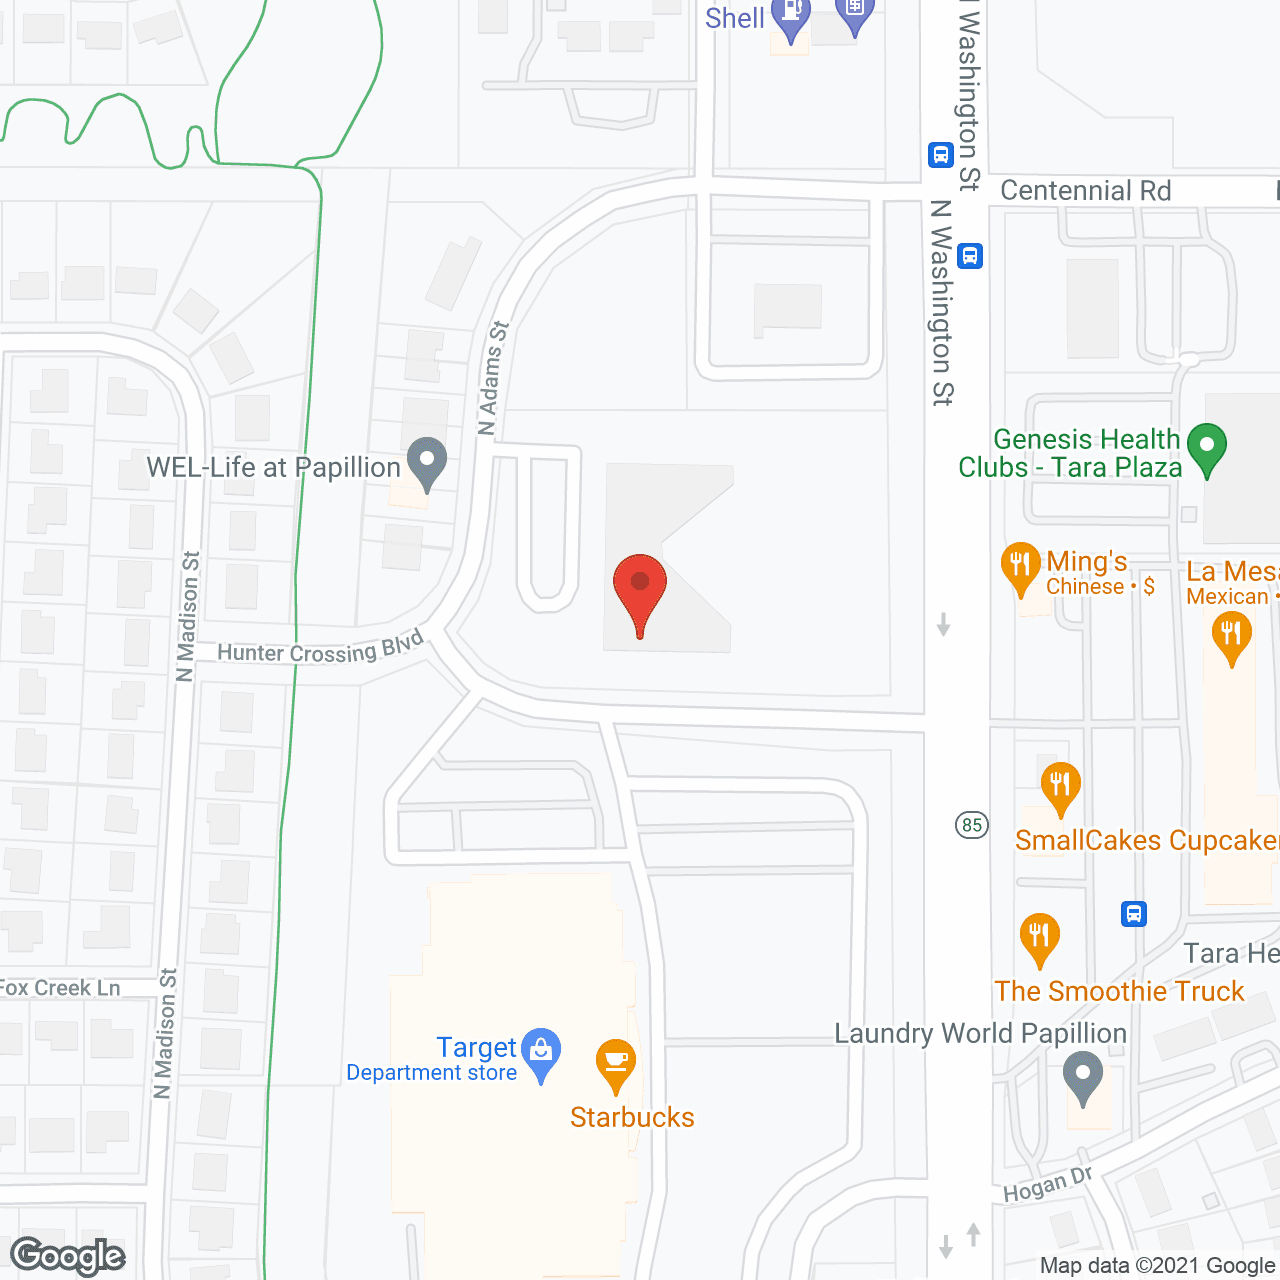 WEL-Life Assisted Living at Papillion in google map